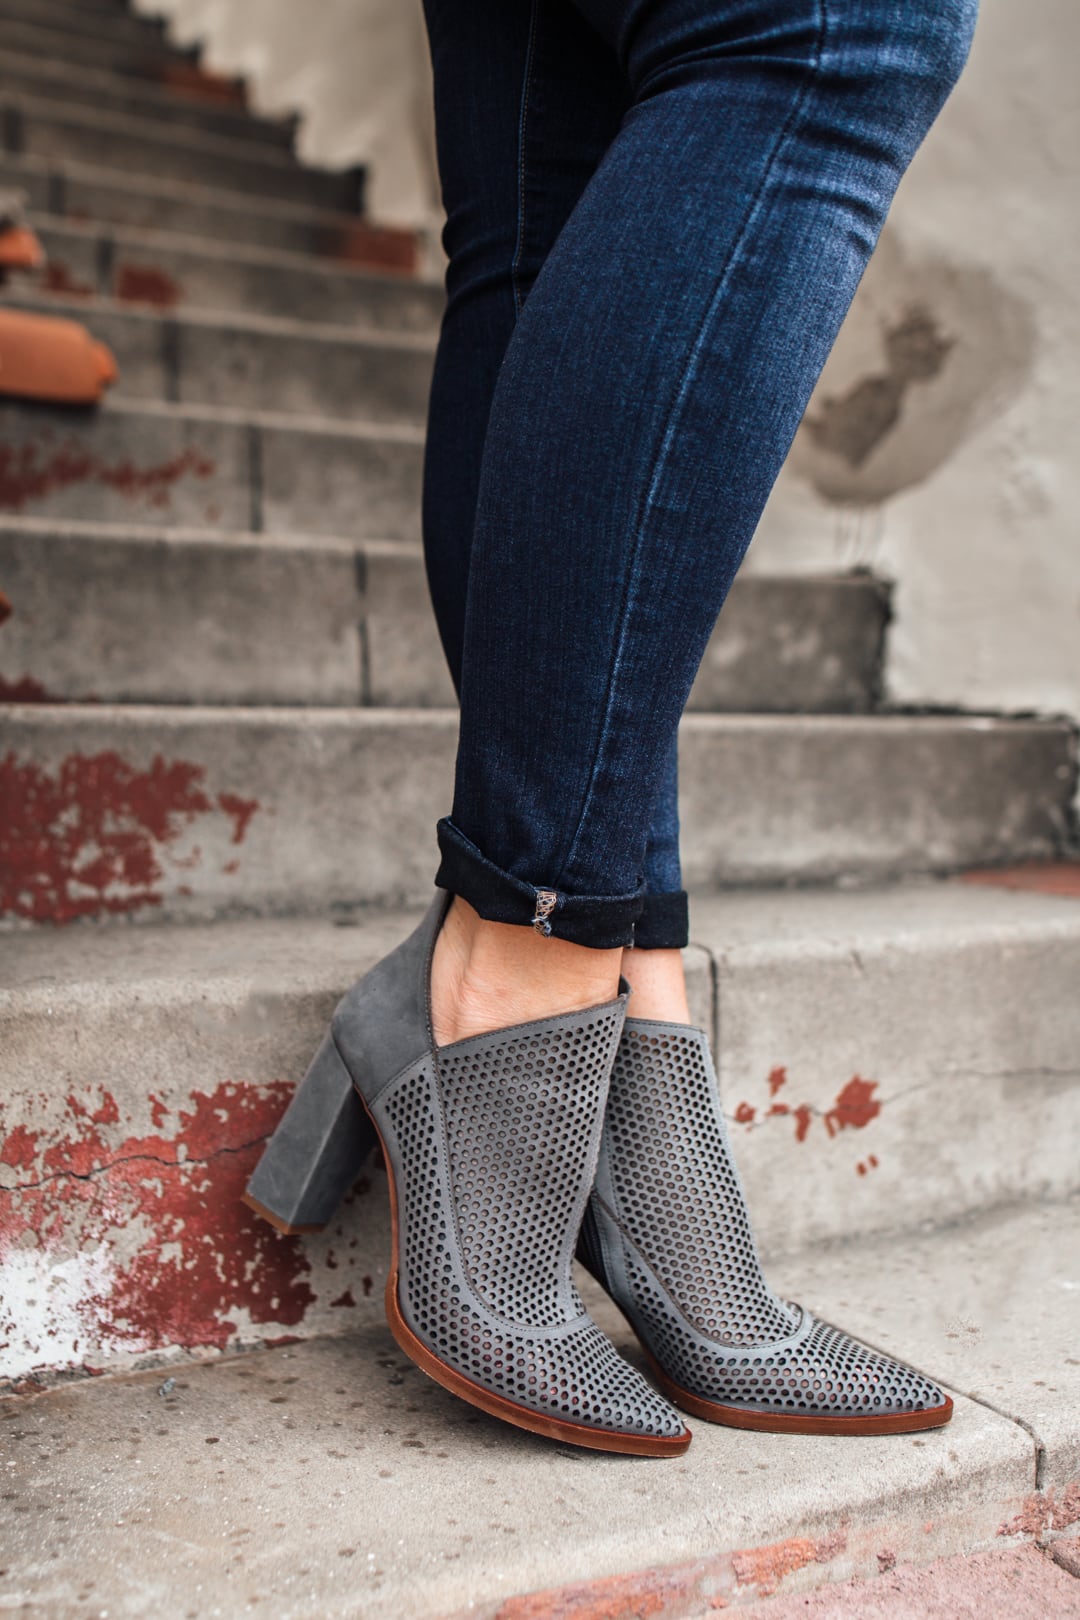 Nordstrom half-yearly sale booties